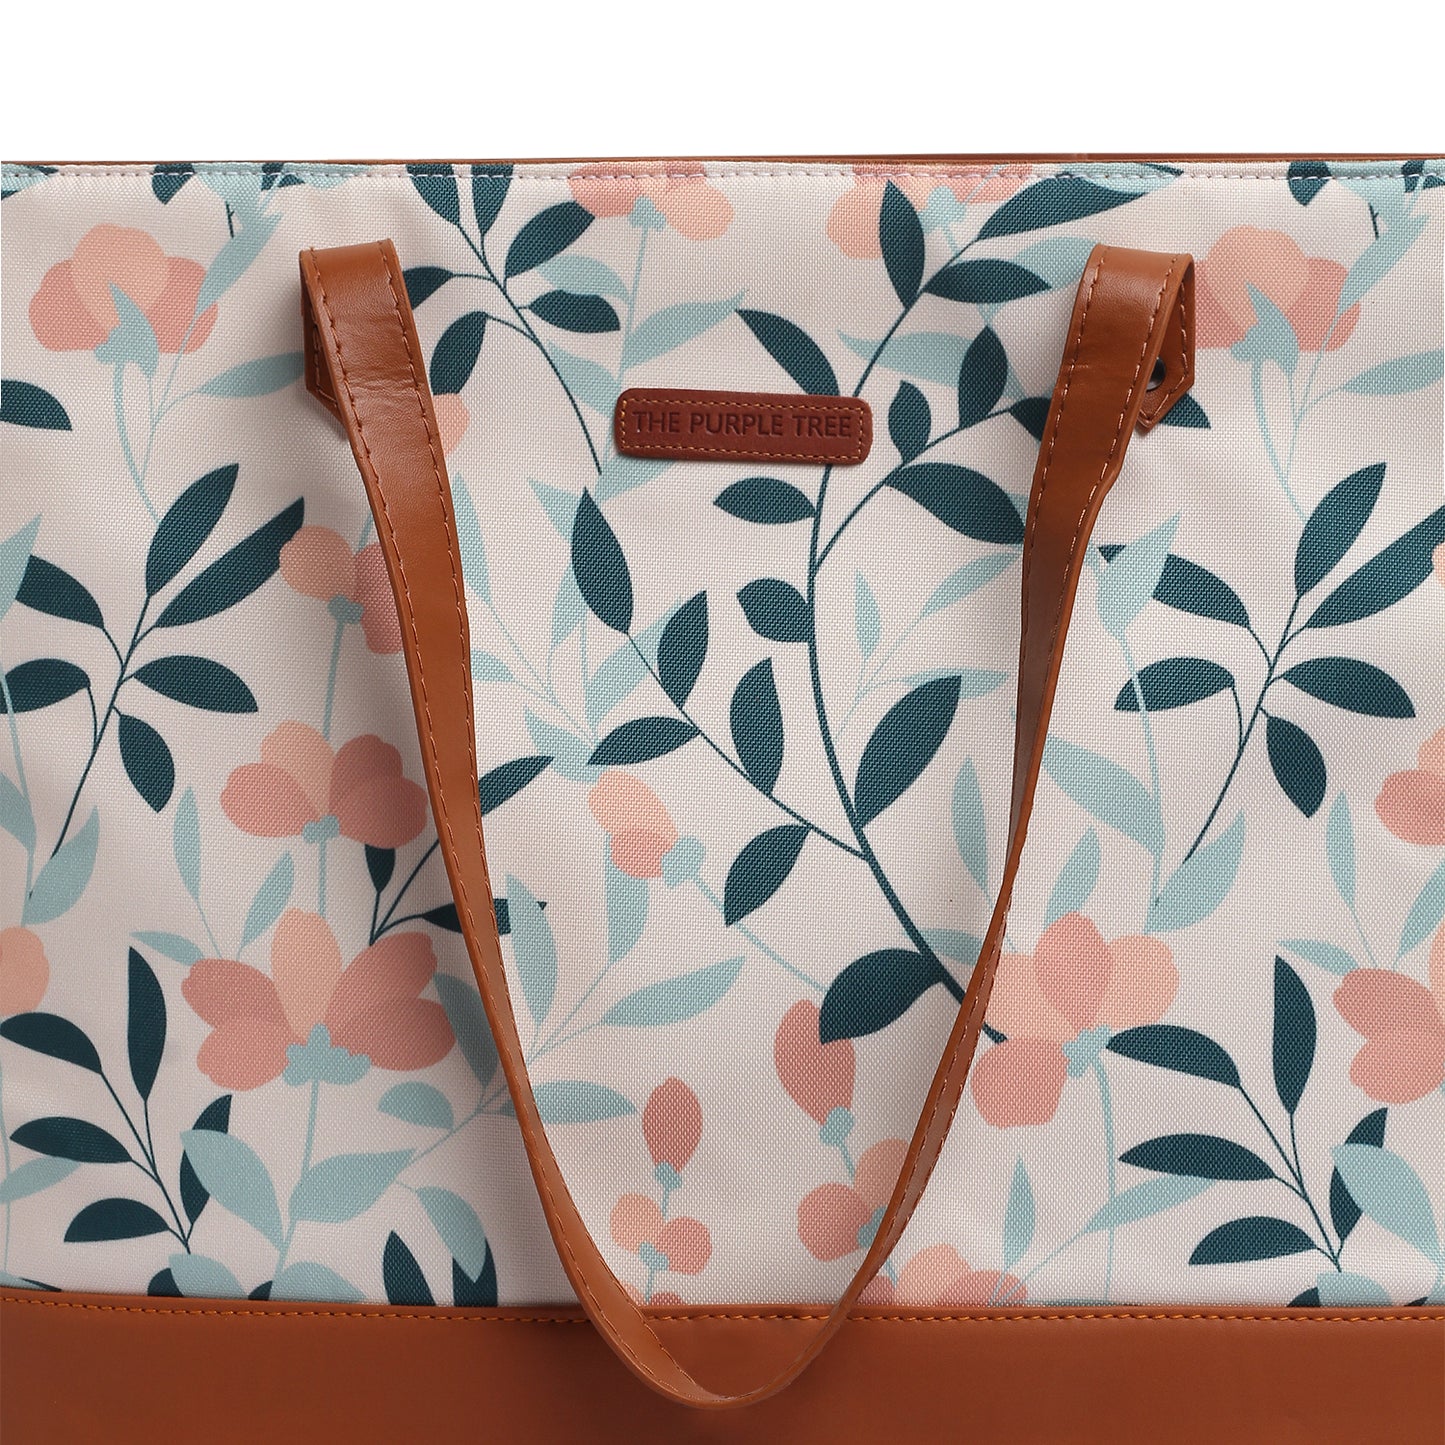 A stylish tote bag with a floral pattern and a brown leather handle. Perfect for adding a touch of elegance to any outfit.